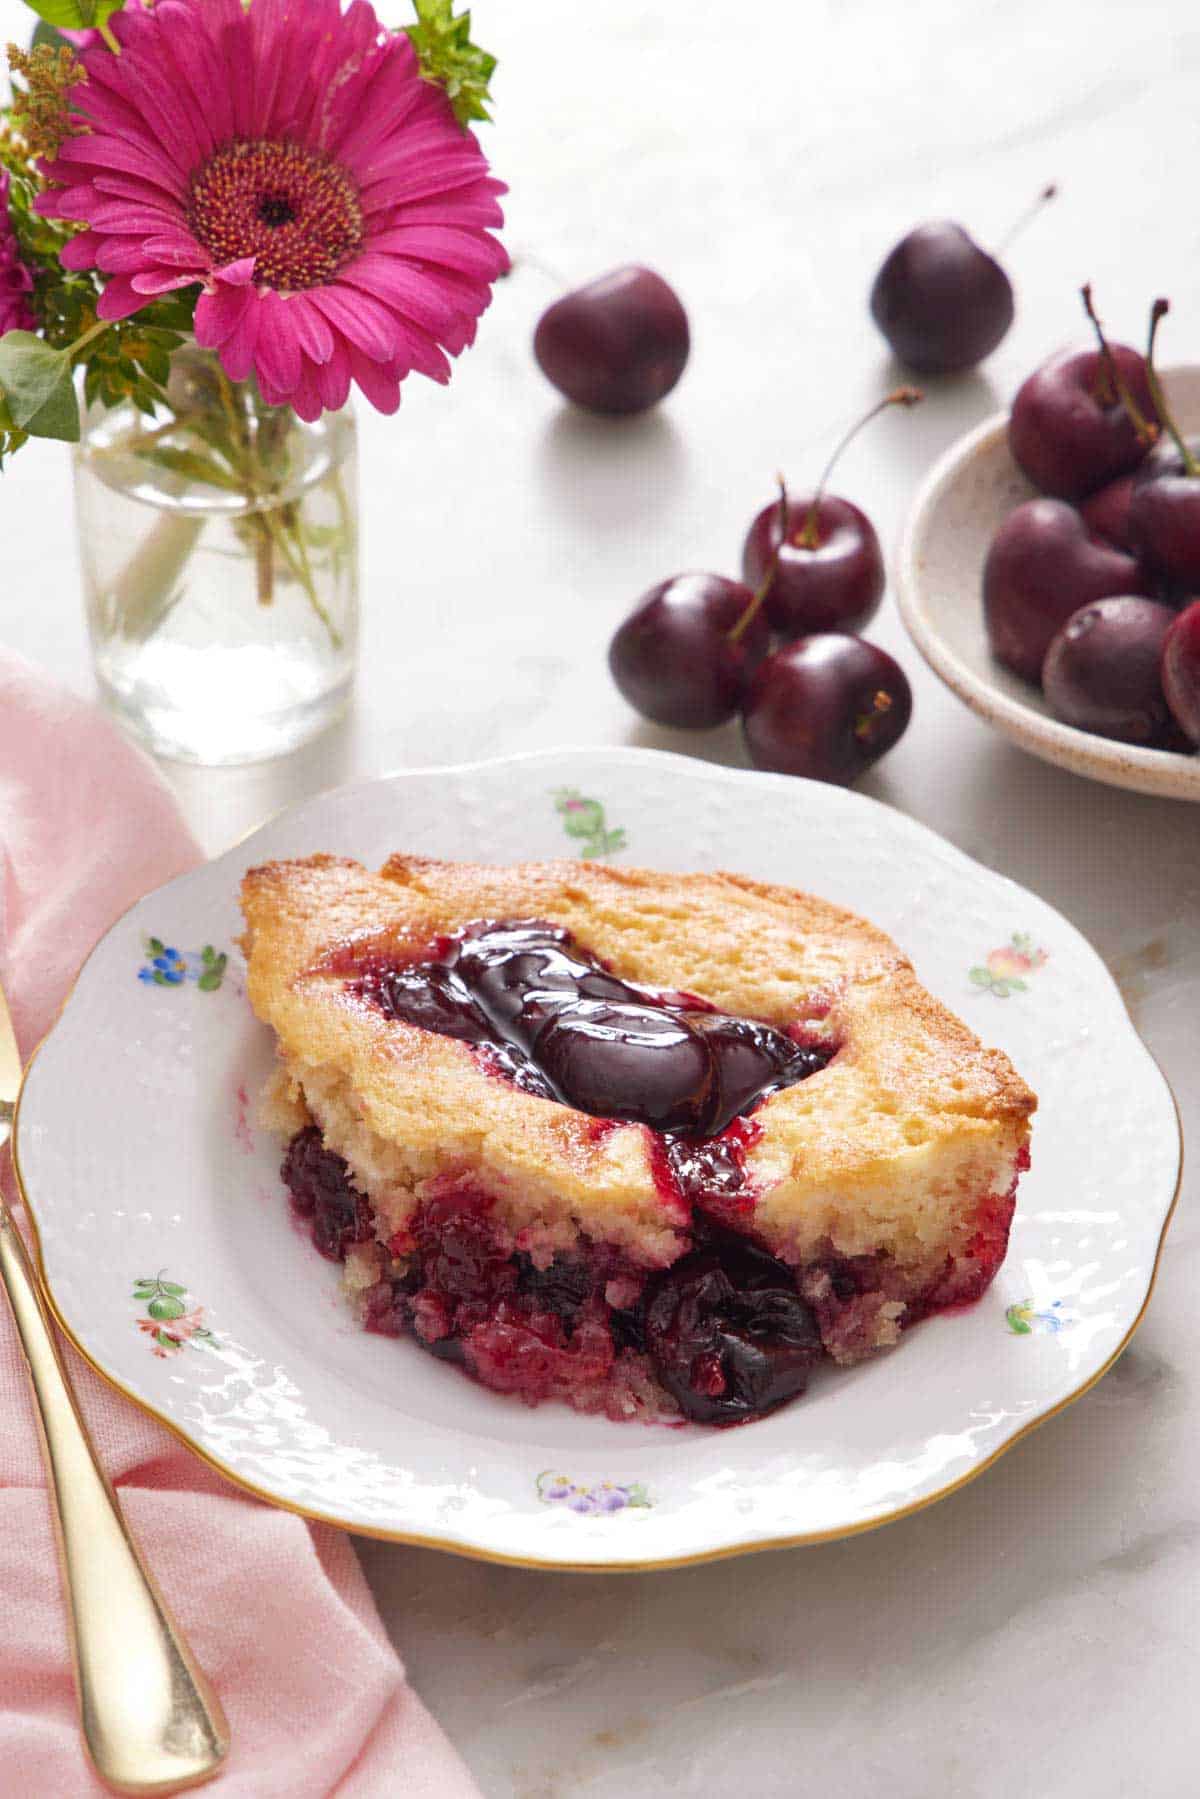 A plate with a serving of cherry cobbler with a small vase of flowers and cherries in the background.